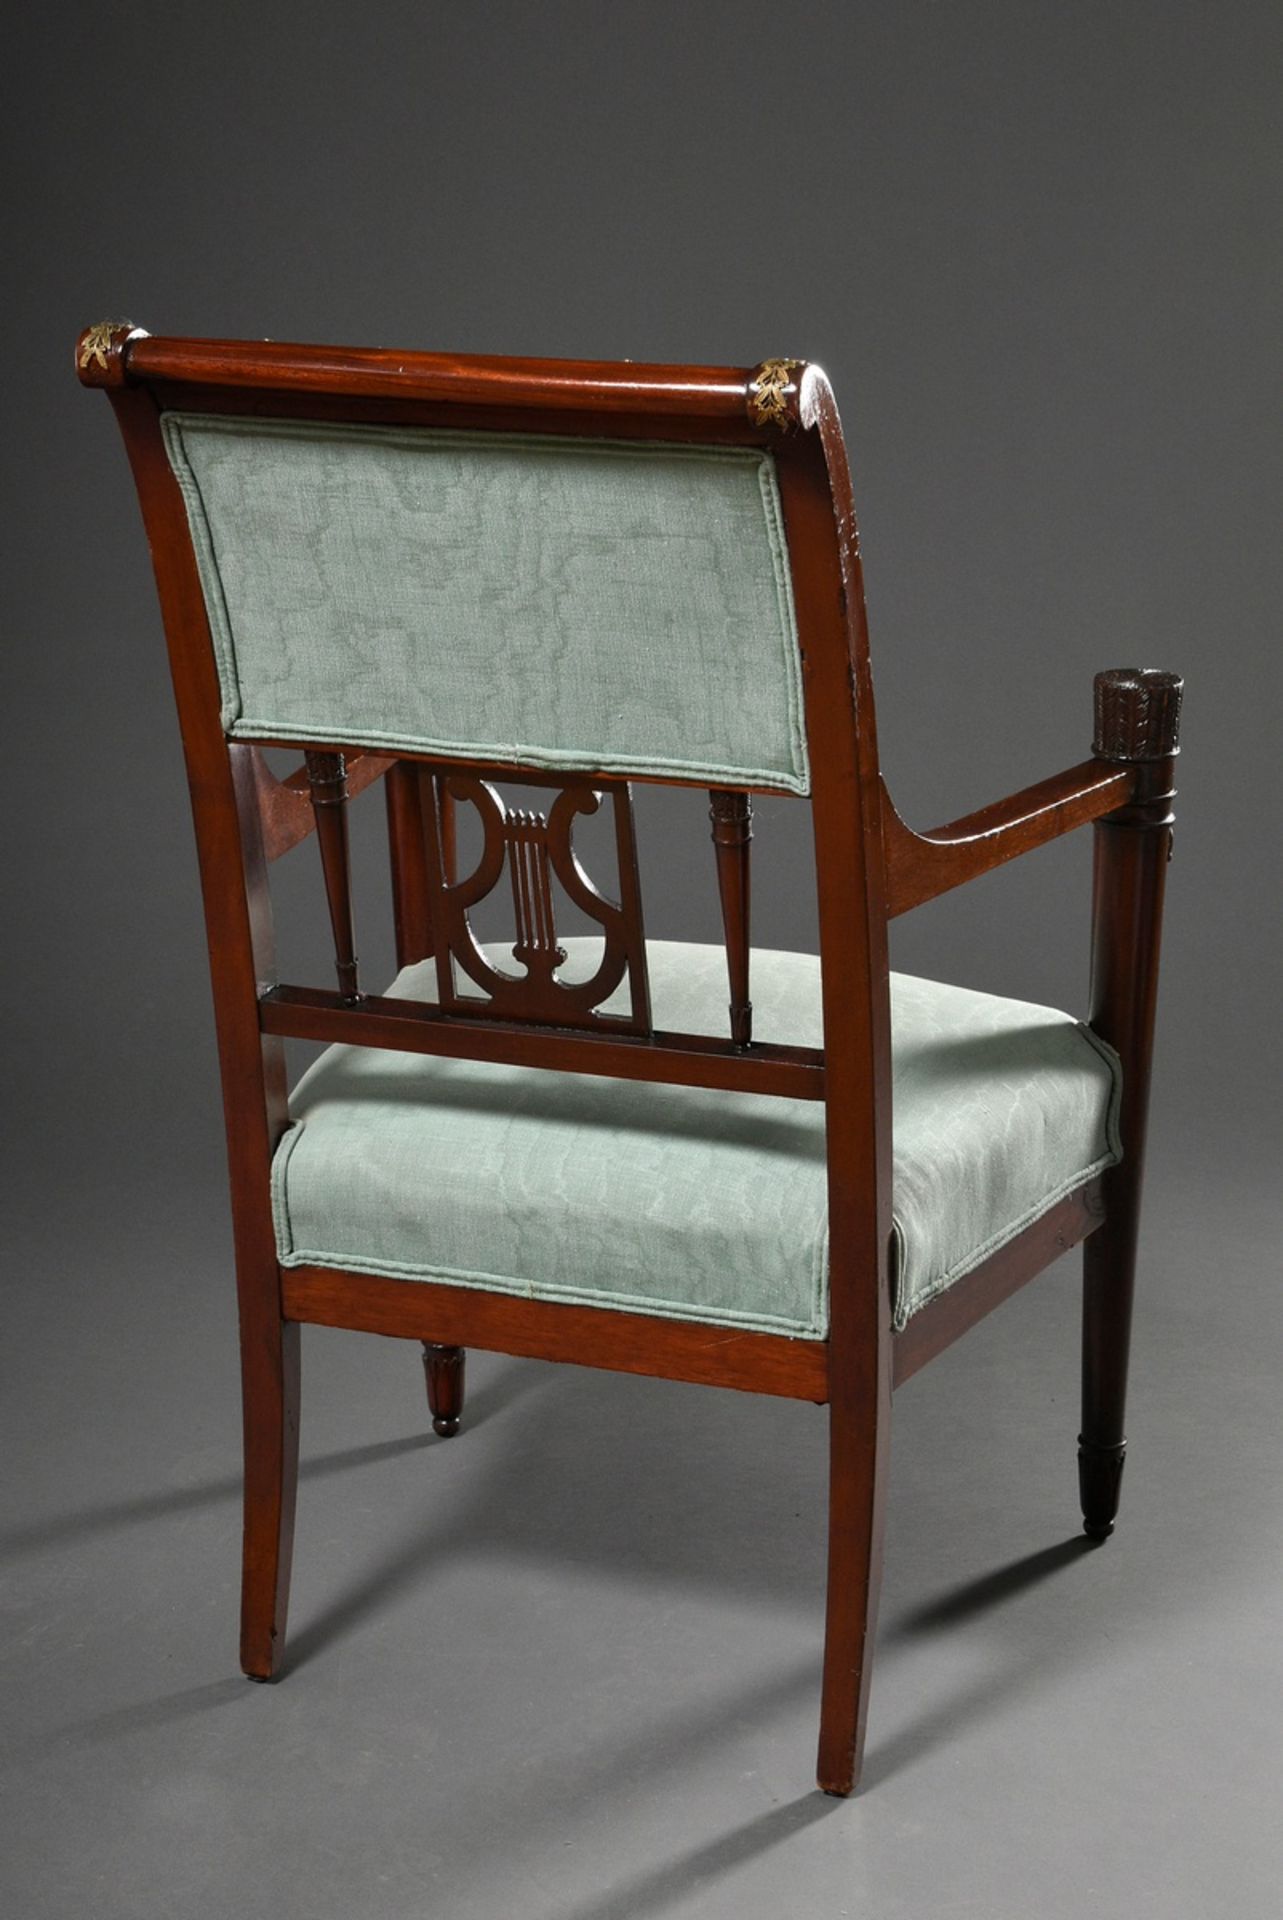 Elegant mahogany armchair in Empire style with fire-gilt fittings and carved lyre in the backrest a - Image 9 of 9